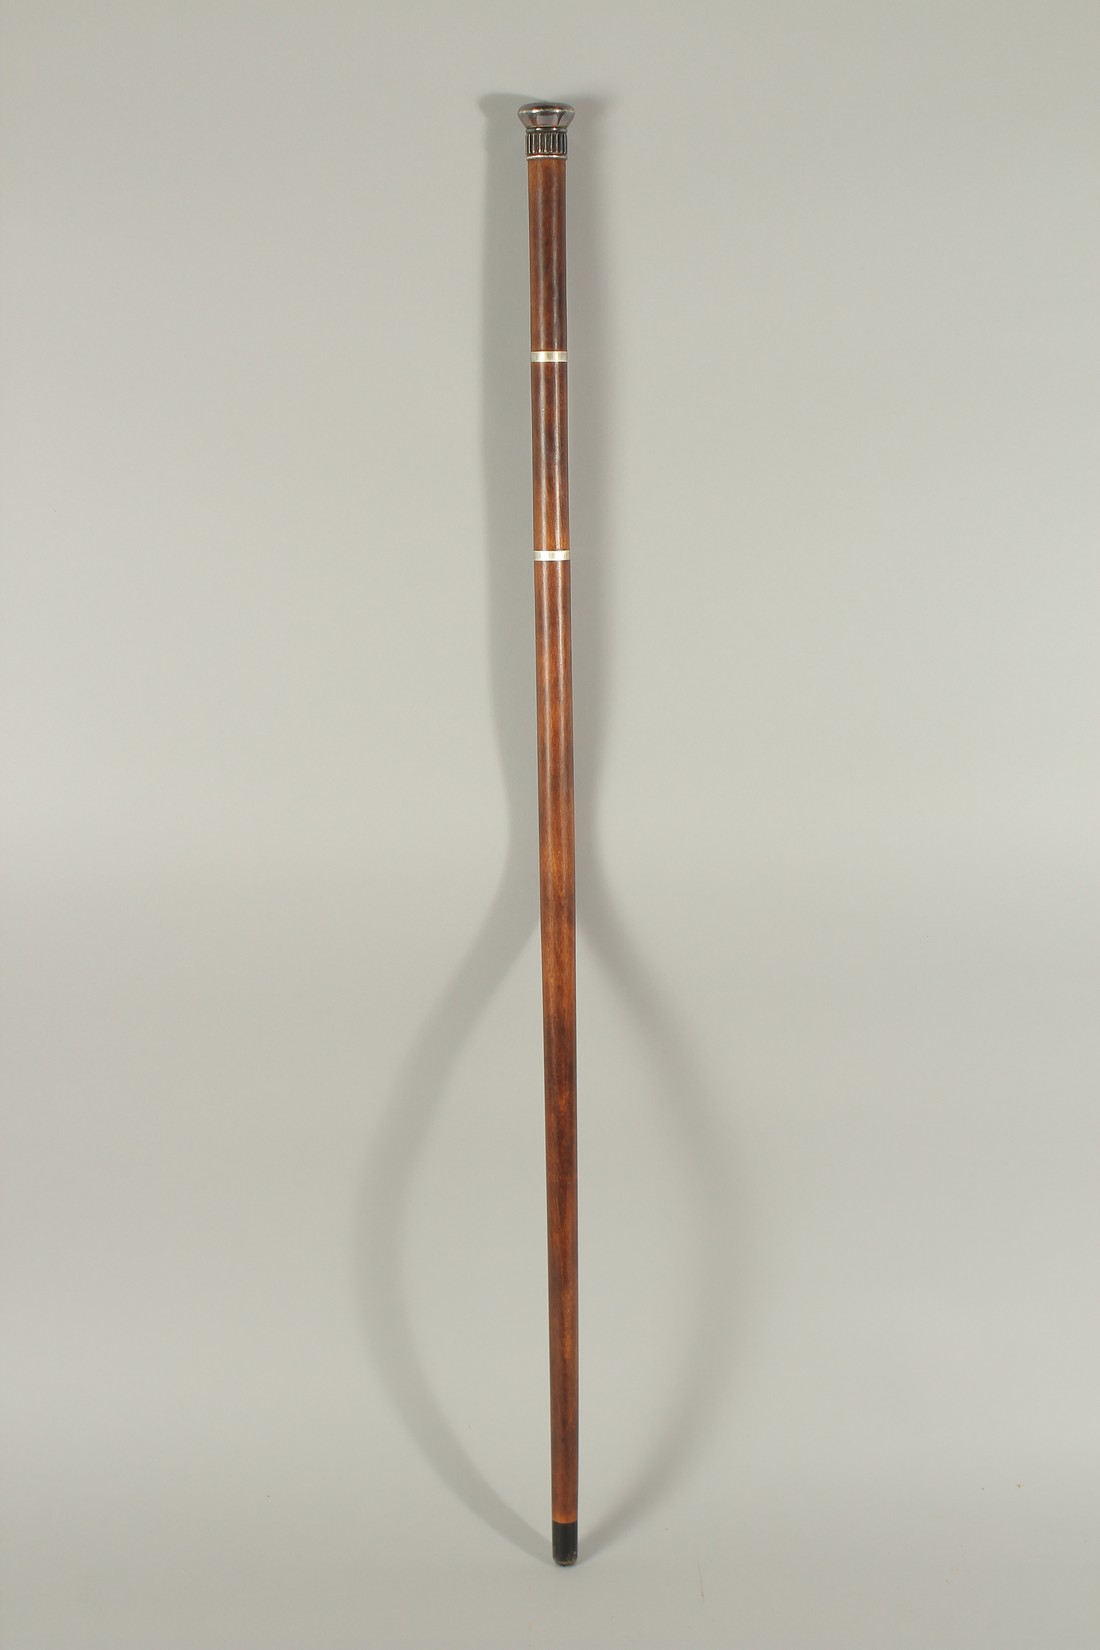 A RARE 19TH CENTURY WALKING STICK with metal top and two screw off sections revealing a long glass